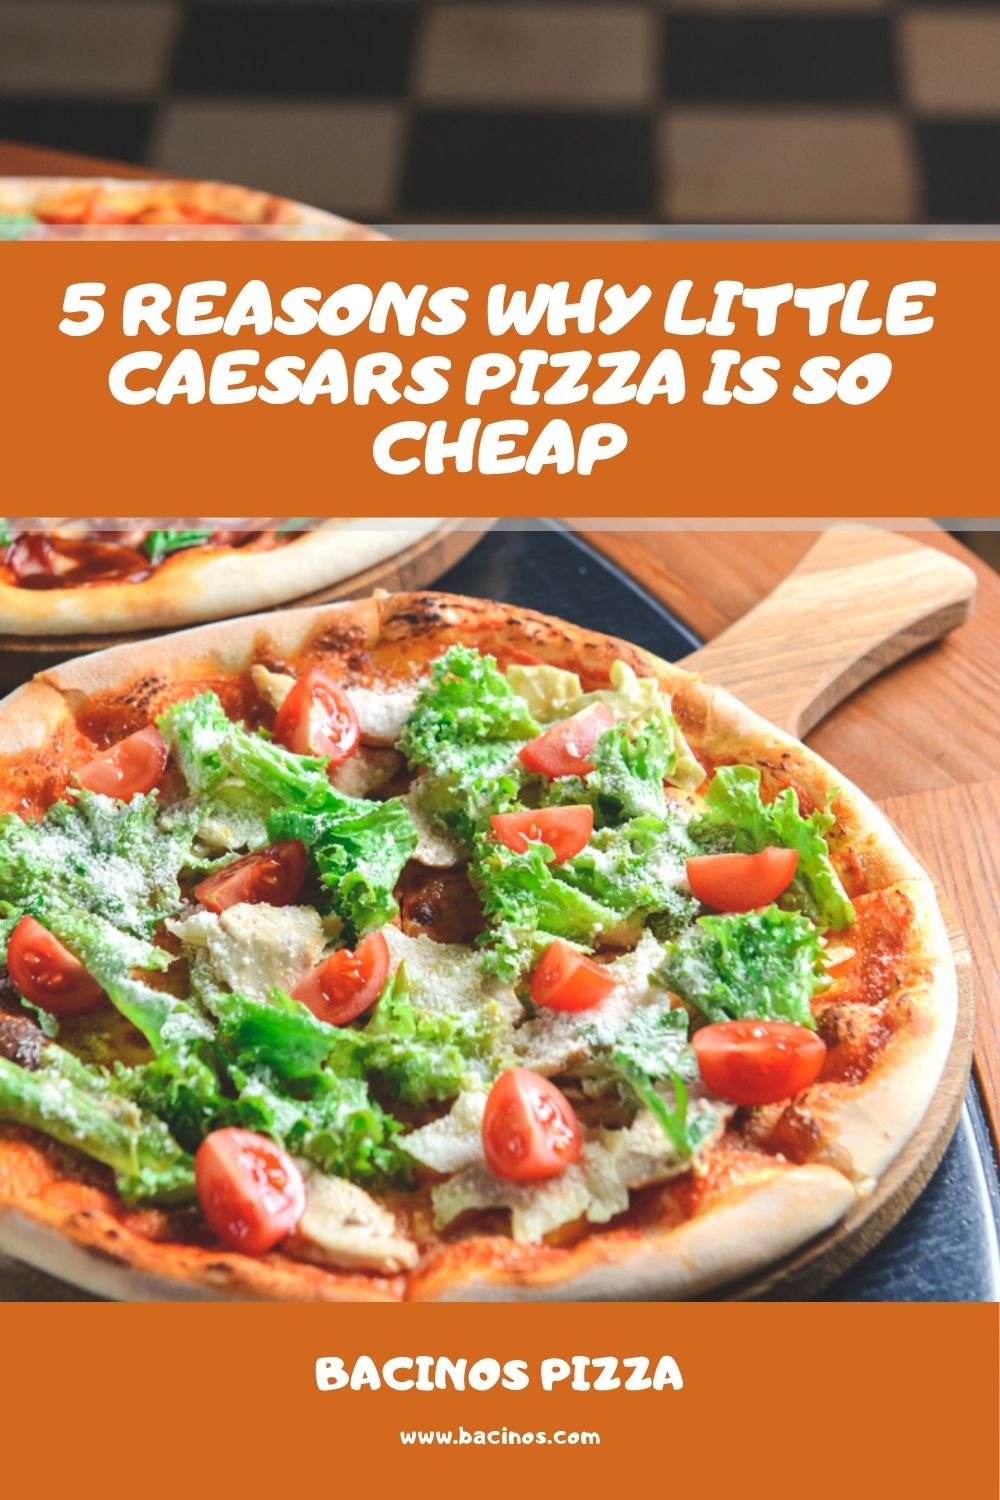 5 Reasons Why Little Caesars Pizza is So Cheap 2